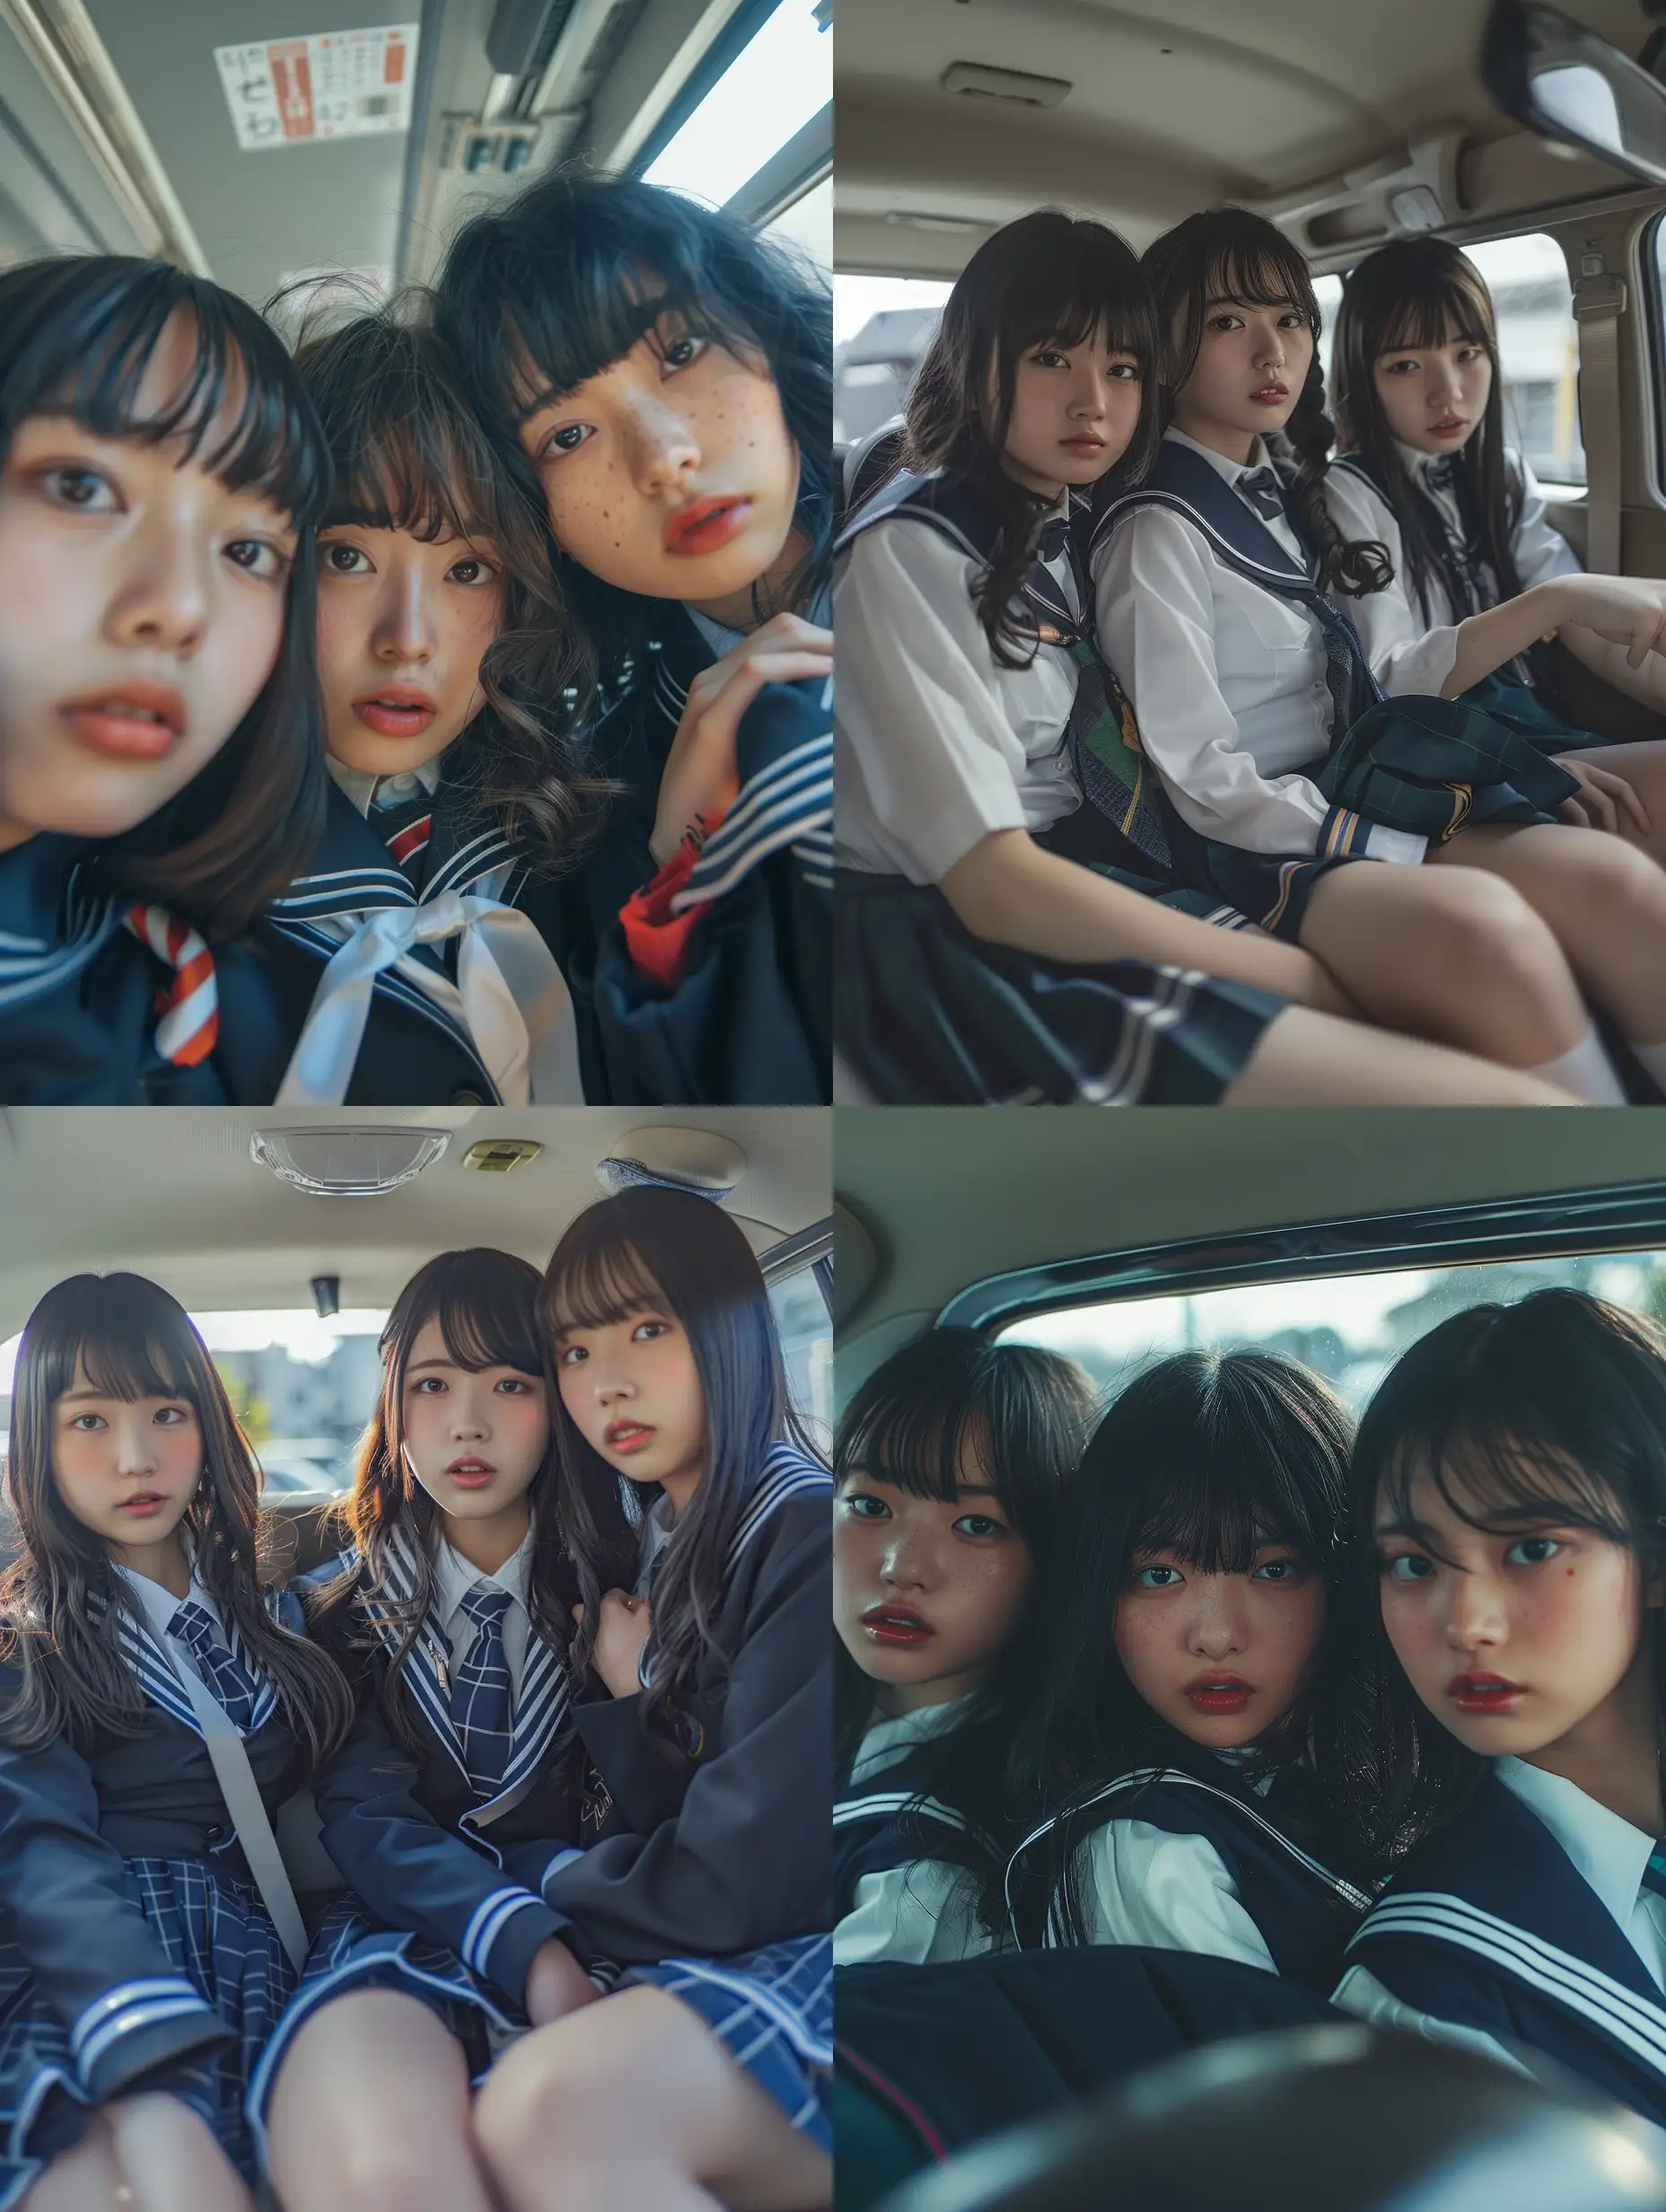 3 Japanese girls, 22 years old, school uniform, linear perspective, posing, inside car, natural photo taken with a nikon D5, 20 mm, low angle --v 6 --ar 3:4